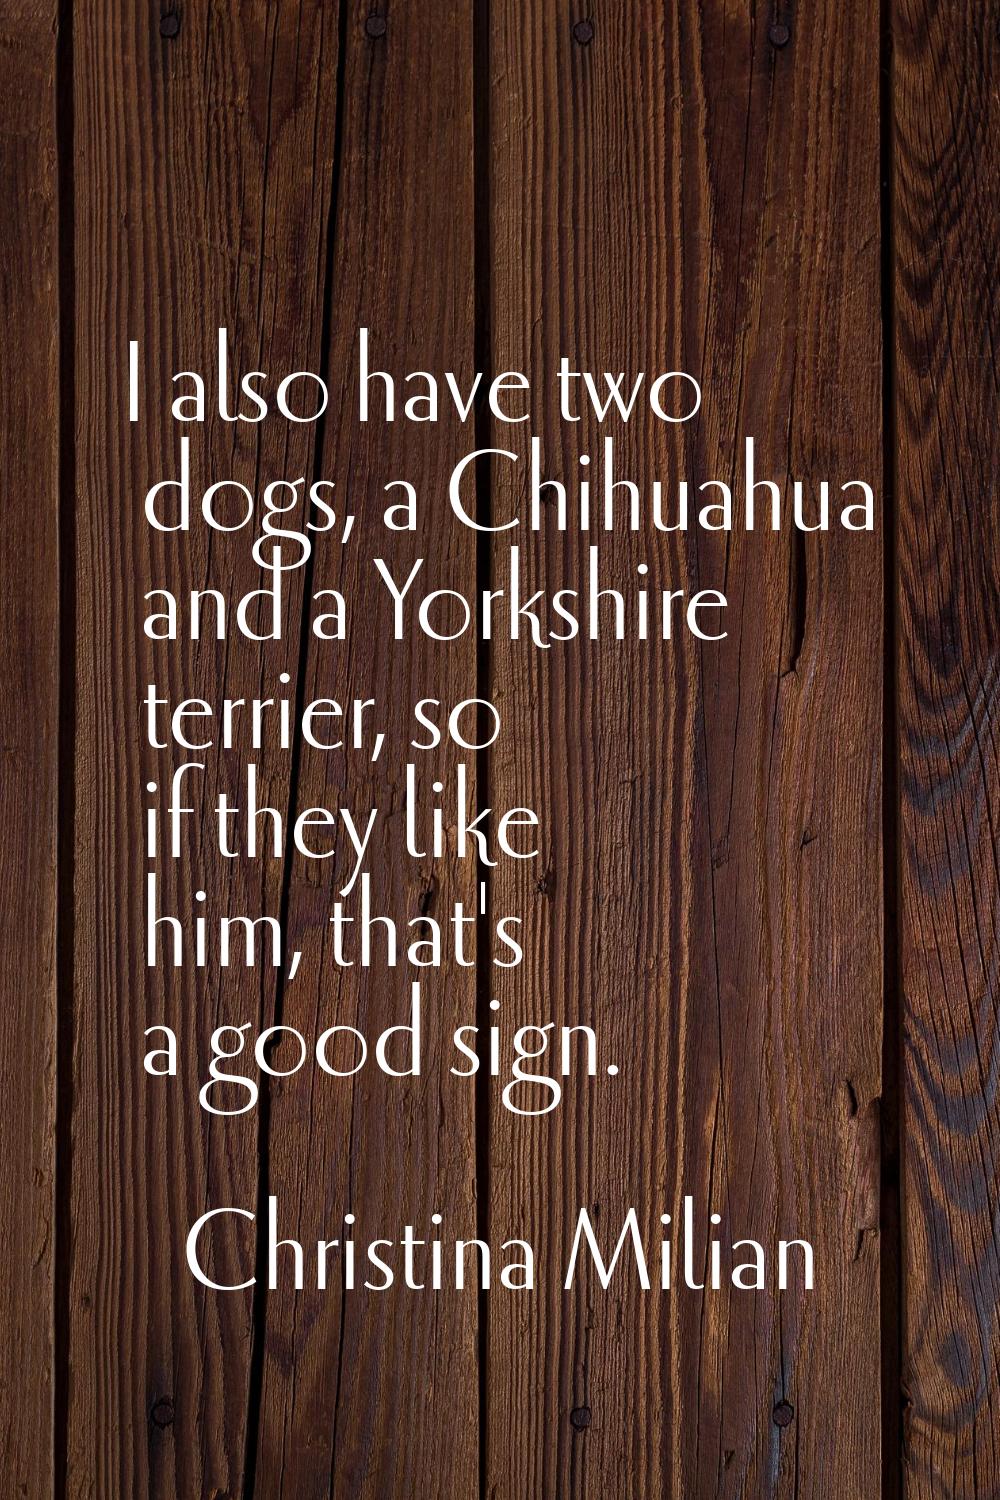 I also have two dogs, a Chihuahua and a Yorkshire terrier, so if they like him, that's a good sign.